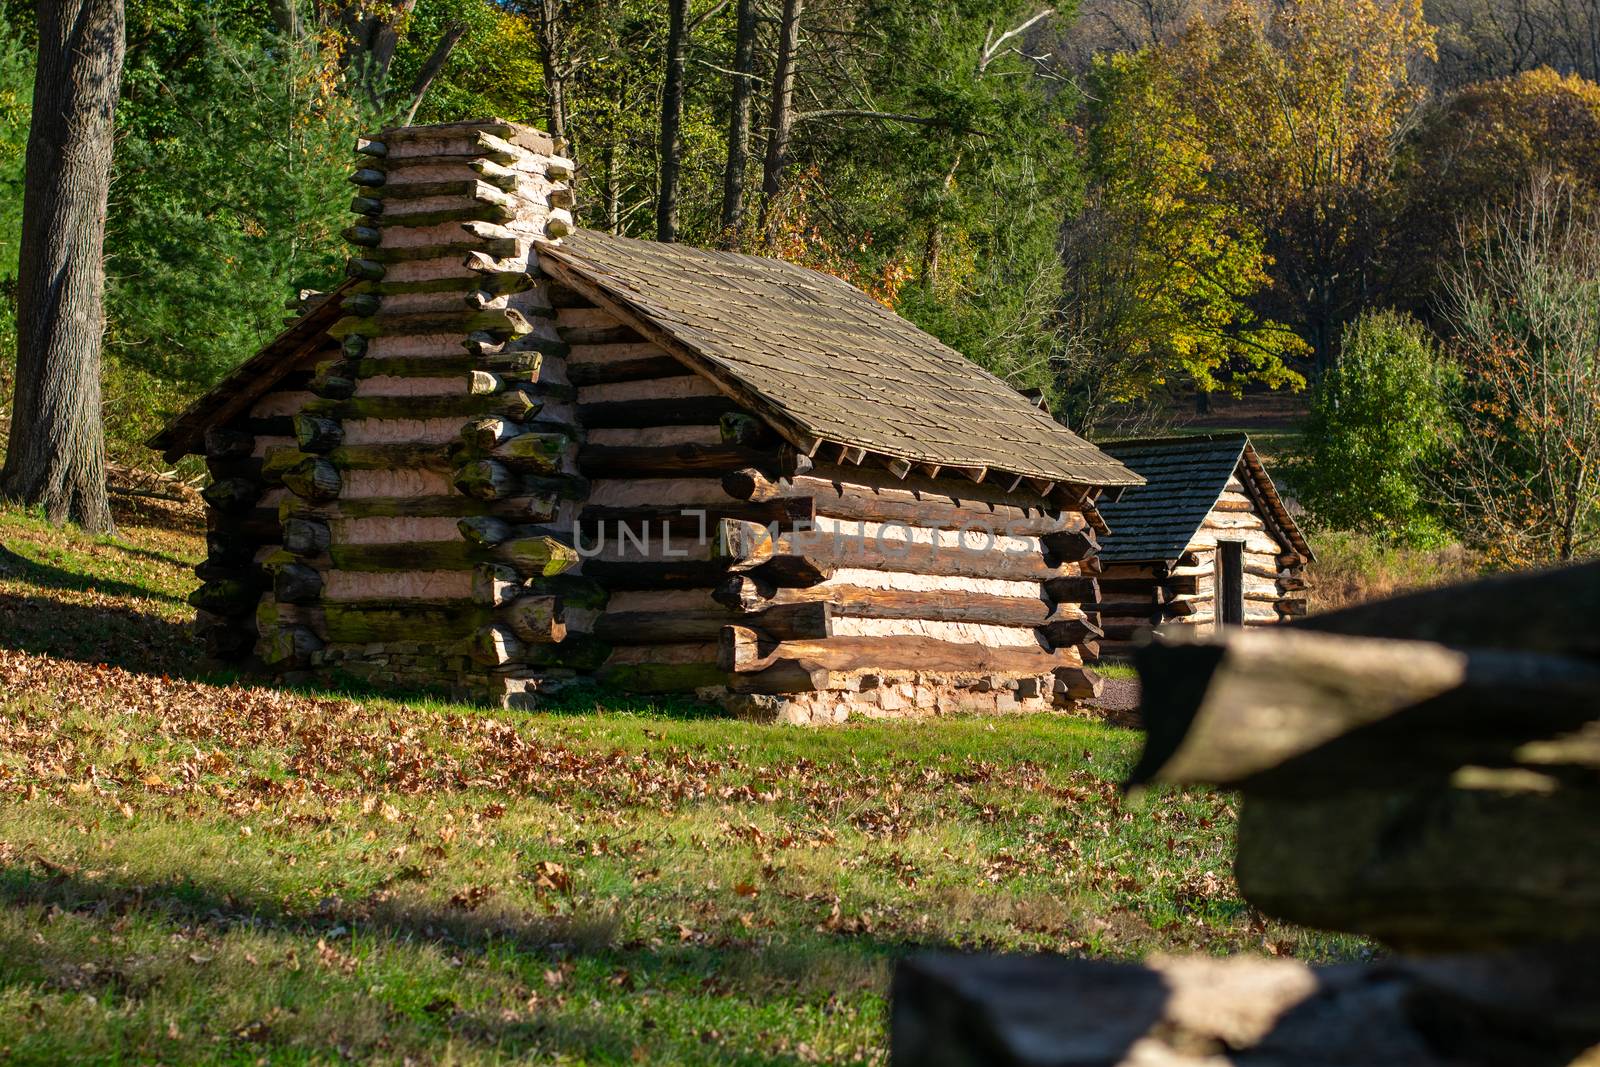 A Reproduction Log Hut at Valley Forge National Historical Park